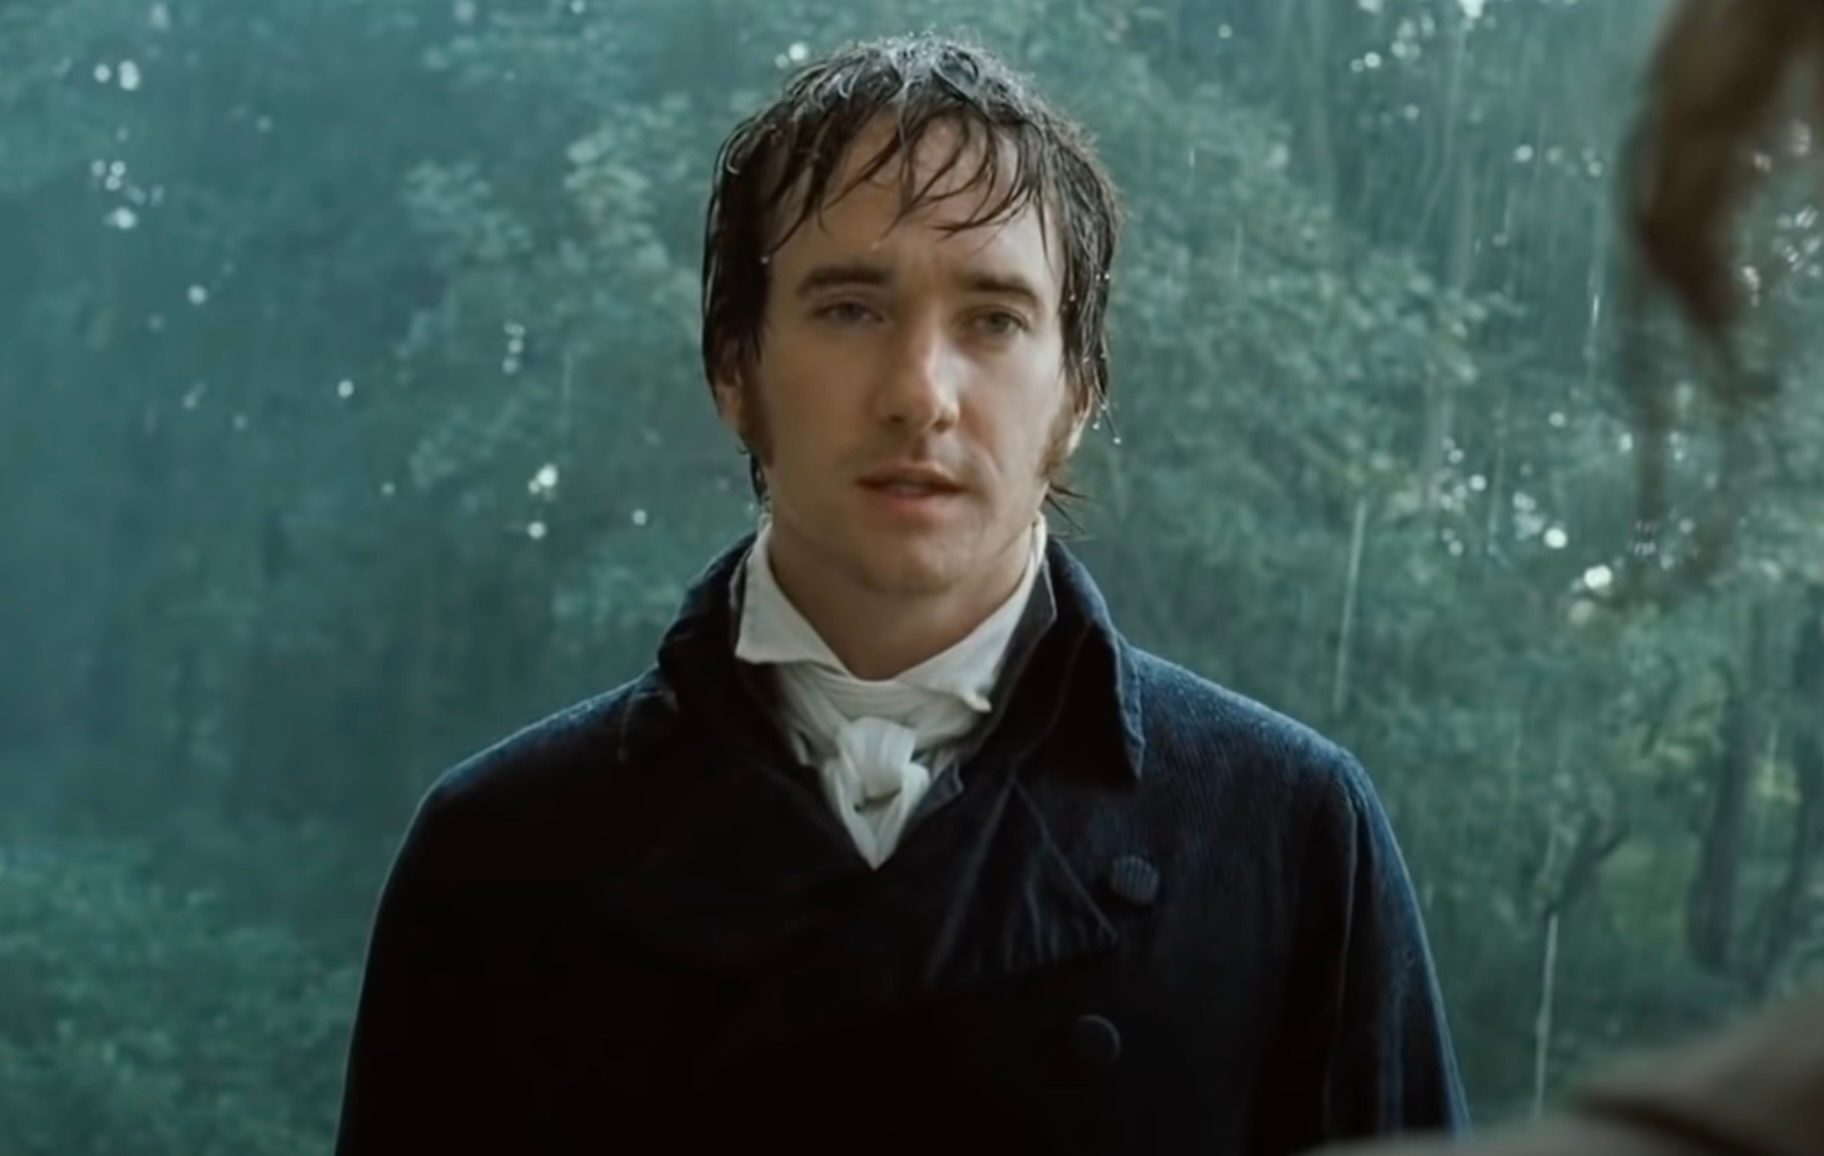 Matthew Macfadyen Reflects On Feeling "Miscast" As Mr. Darcy In 'Pride And Prejudice'